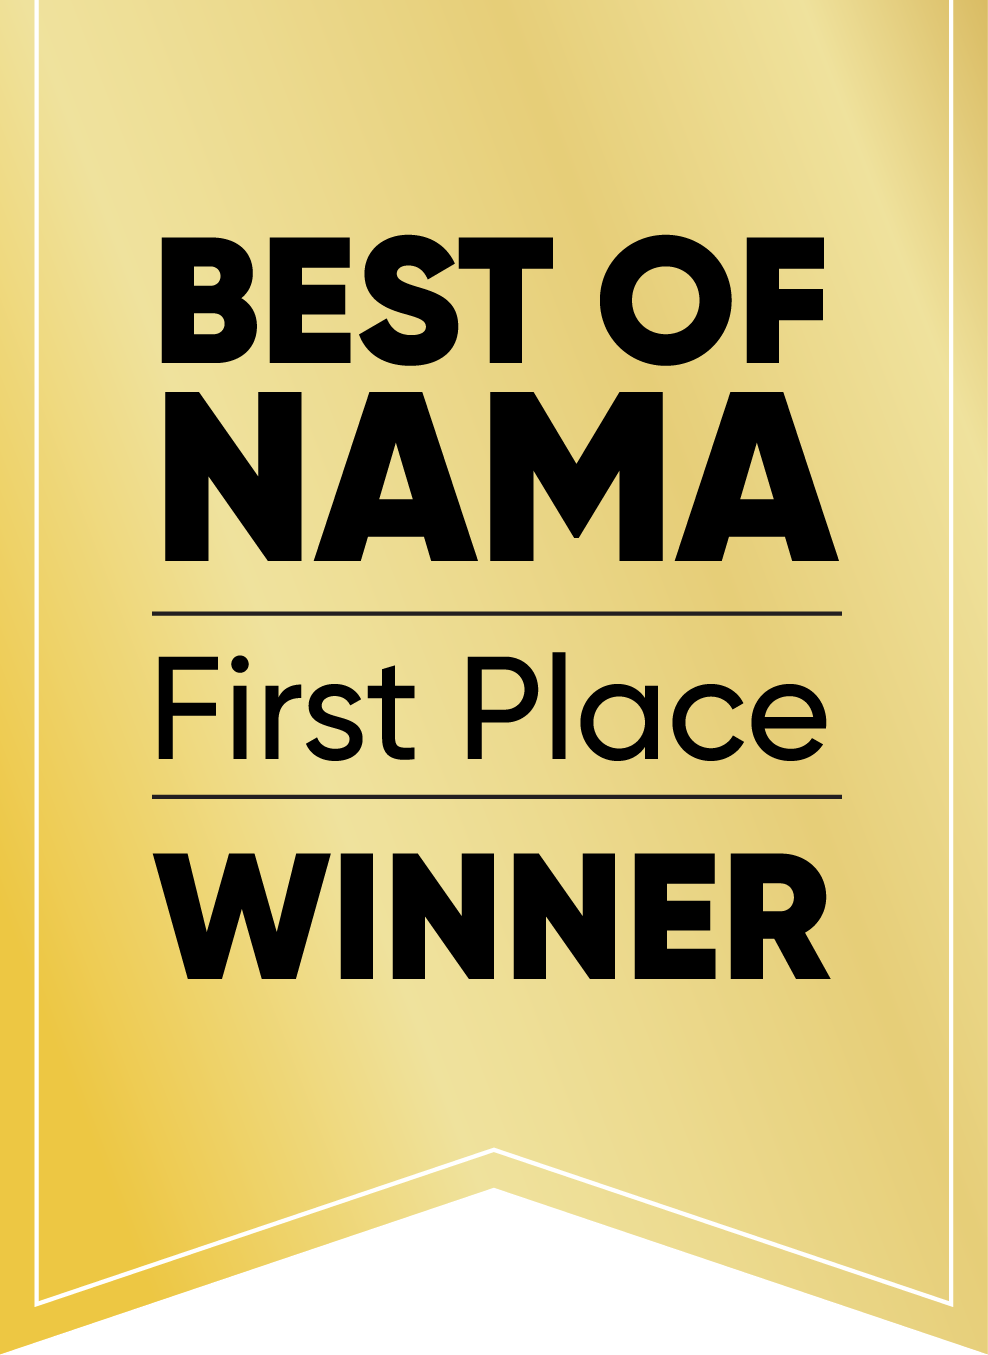 Archer Malmo named first place by Best of NAMA